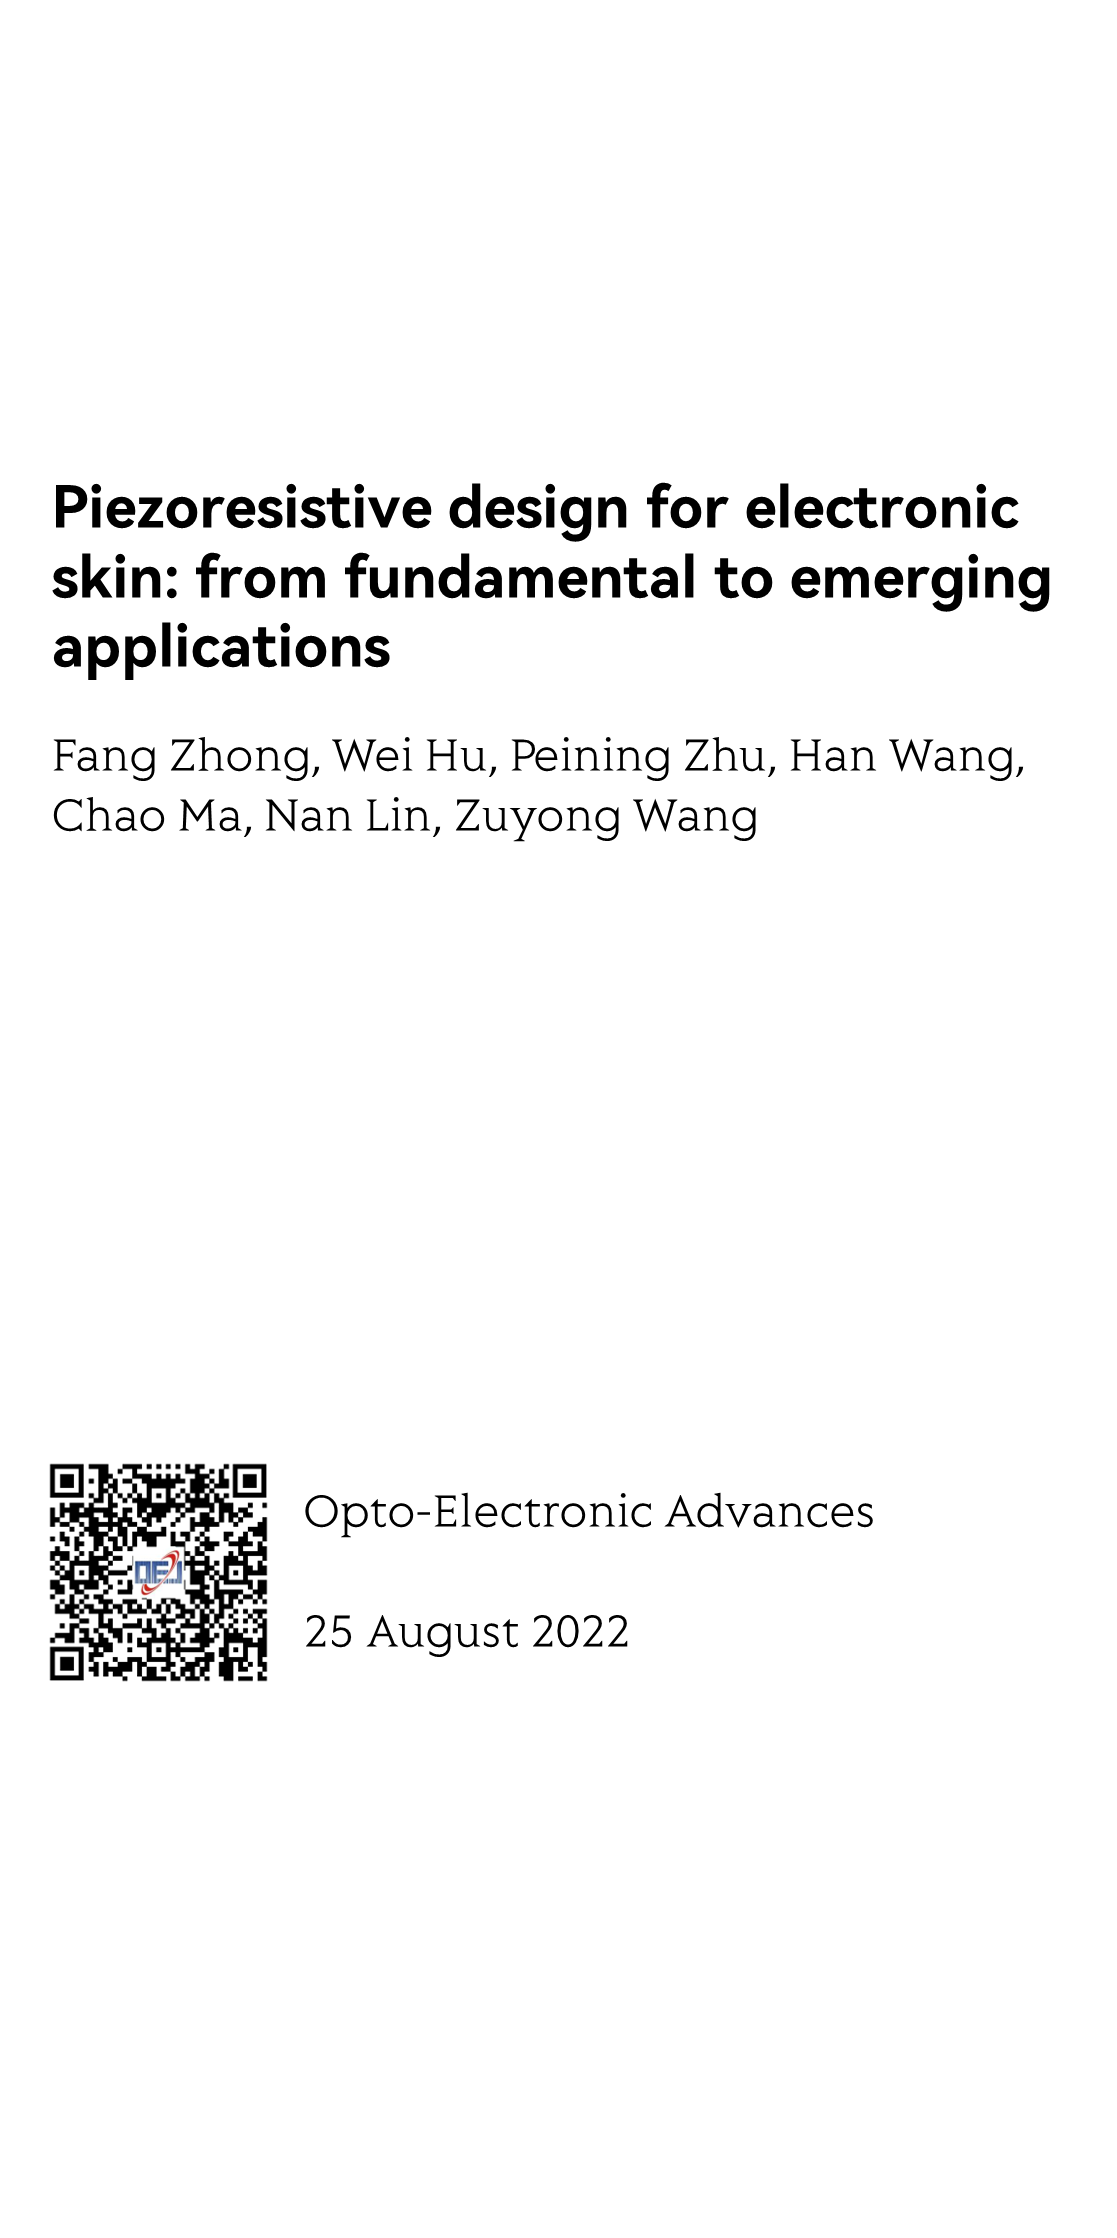 Piezoresistive design for electronic skin: from fundamental to emerging applications_1